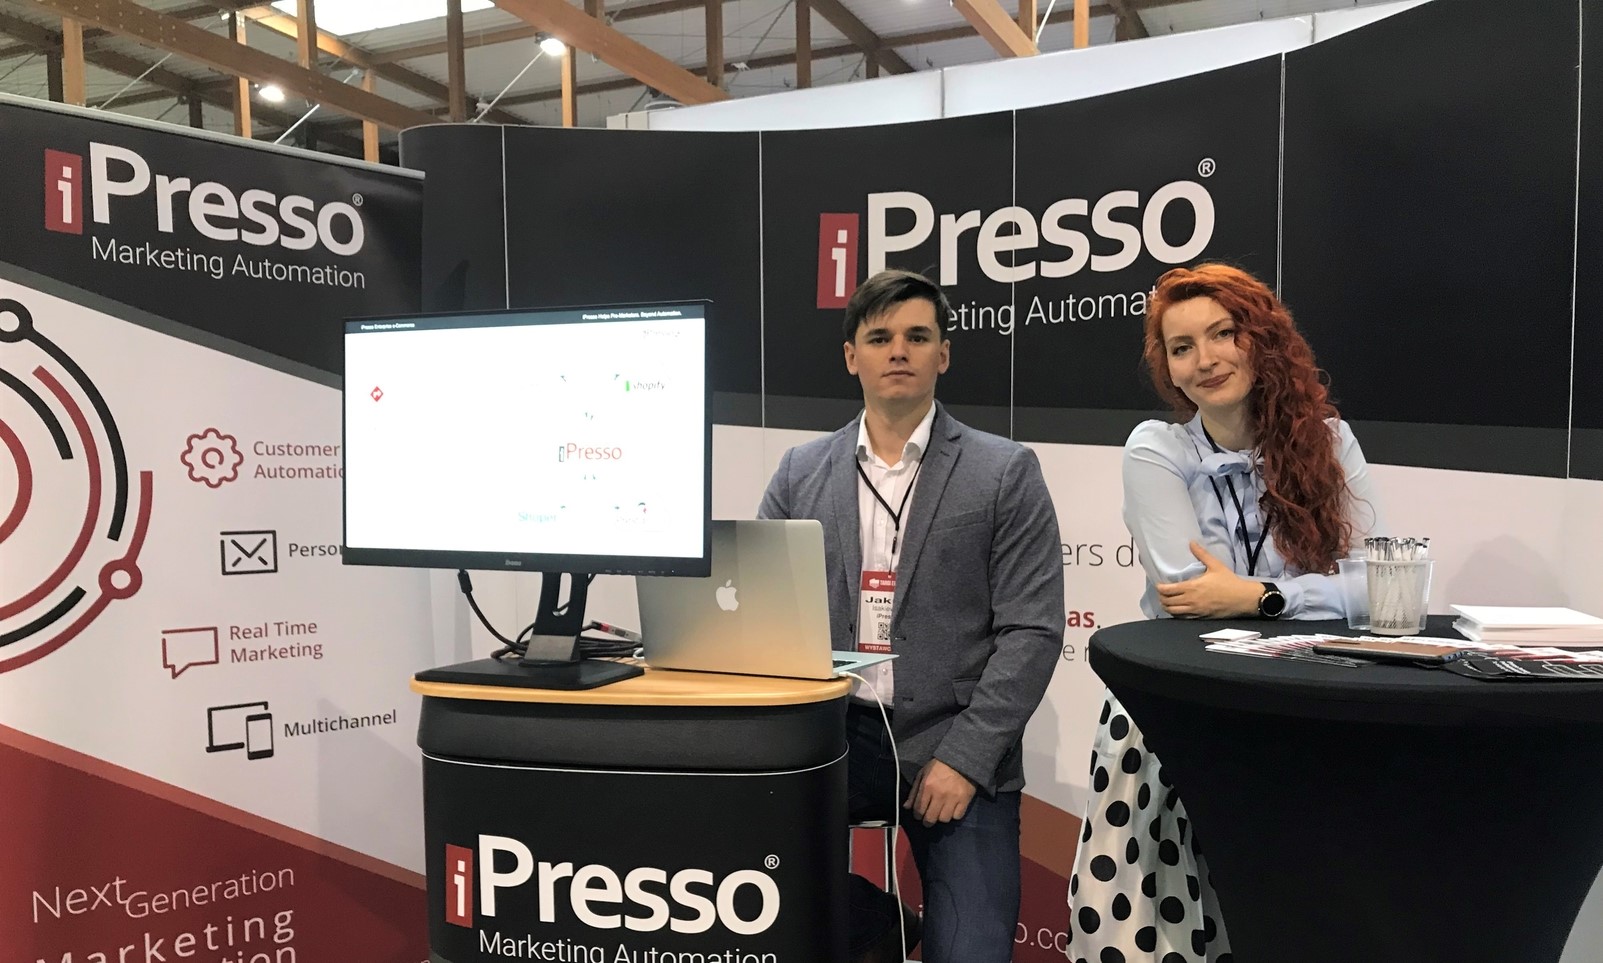 iPresso at E-commerce Cracow Expo